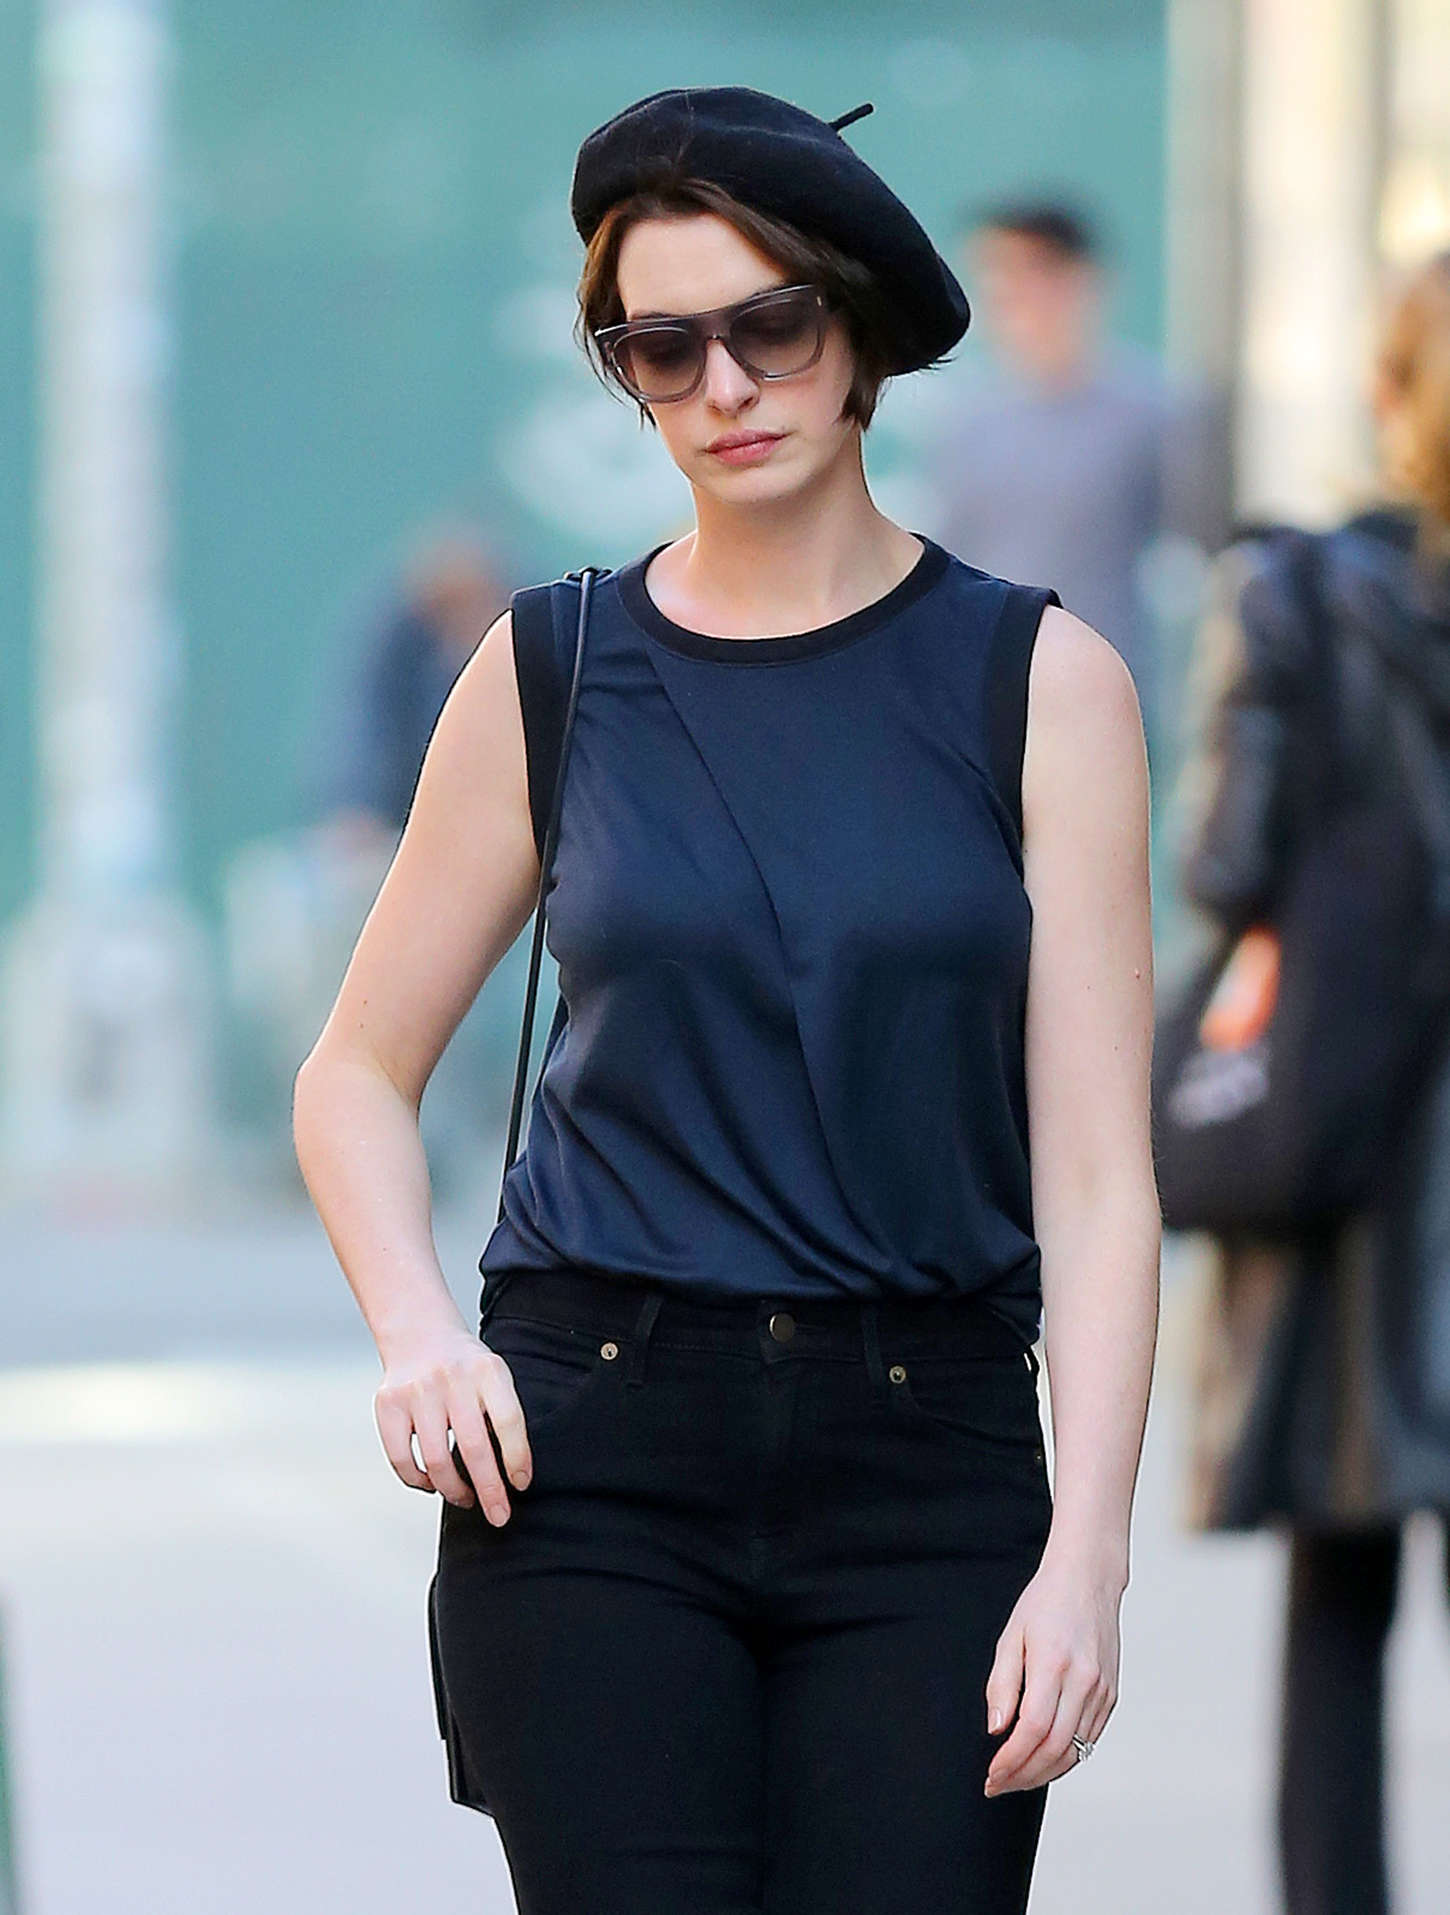 Anne Hathaway in Parisian beret out in NYC